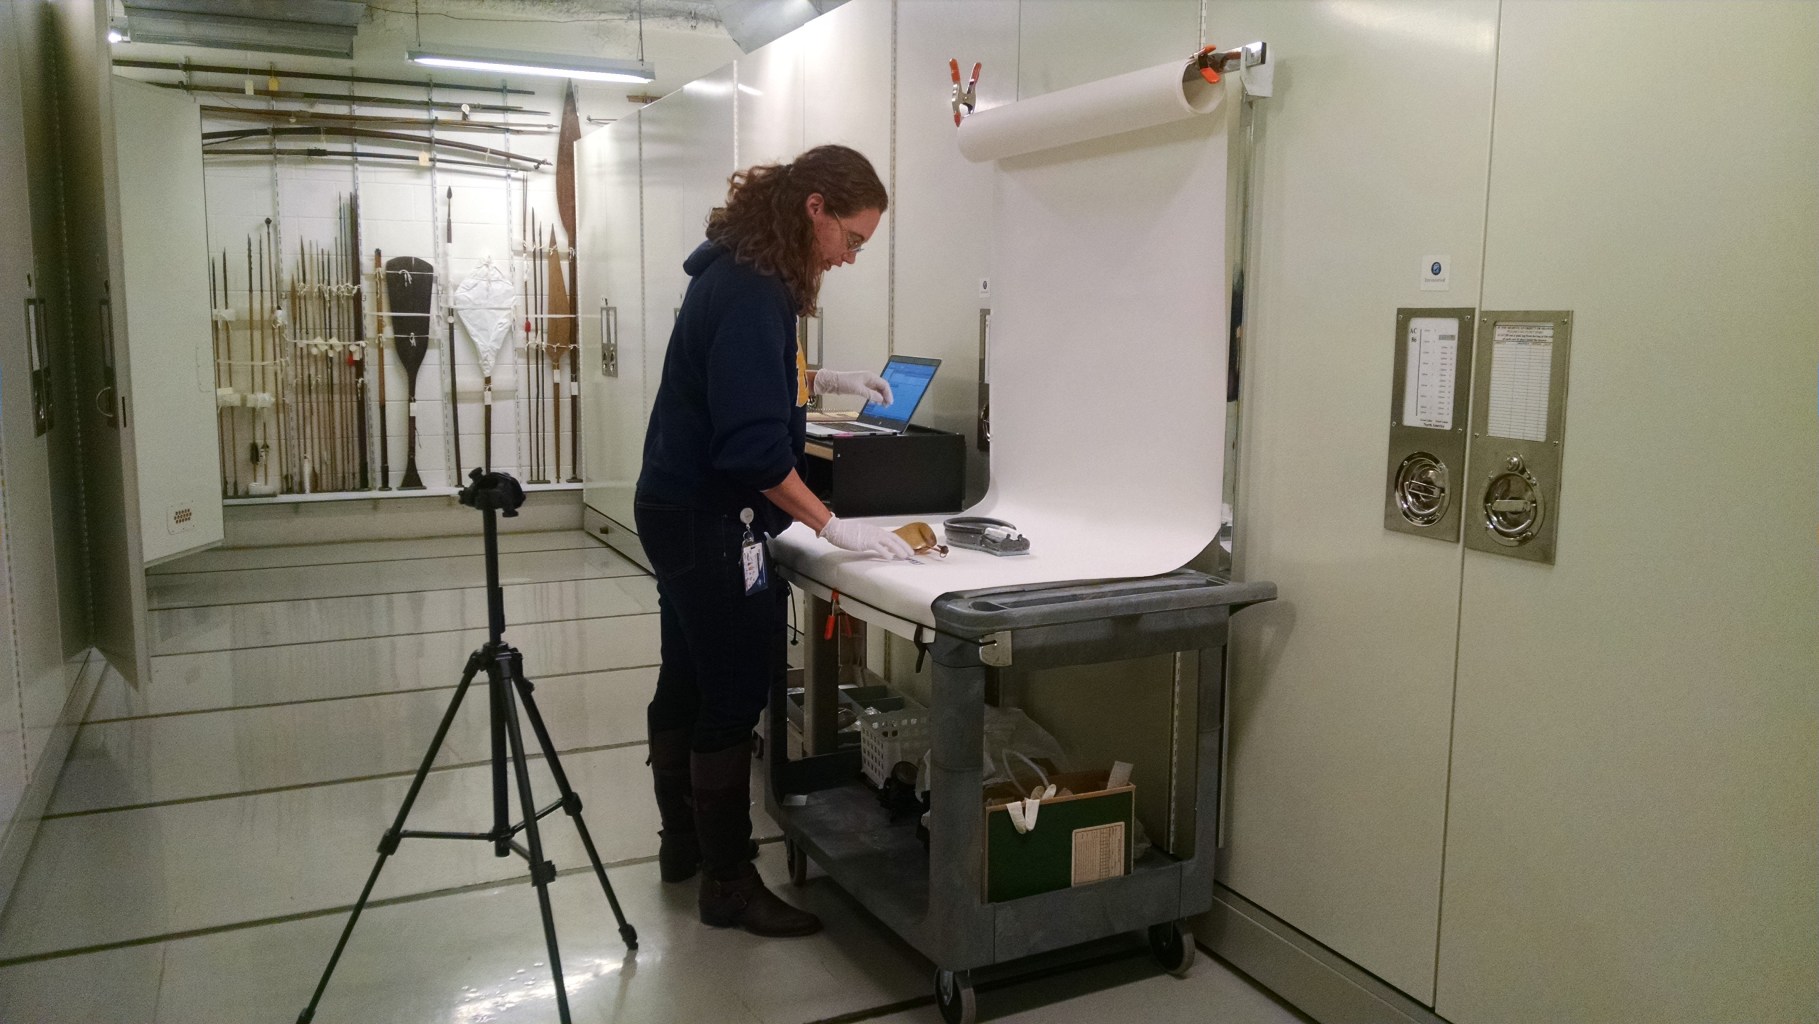 A museum employee stands at an imaging station with an object laid out on a white sheet of paper, and a camera pointed at it.